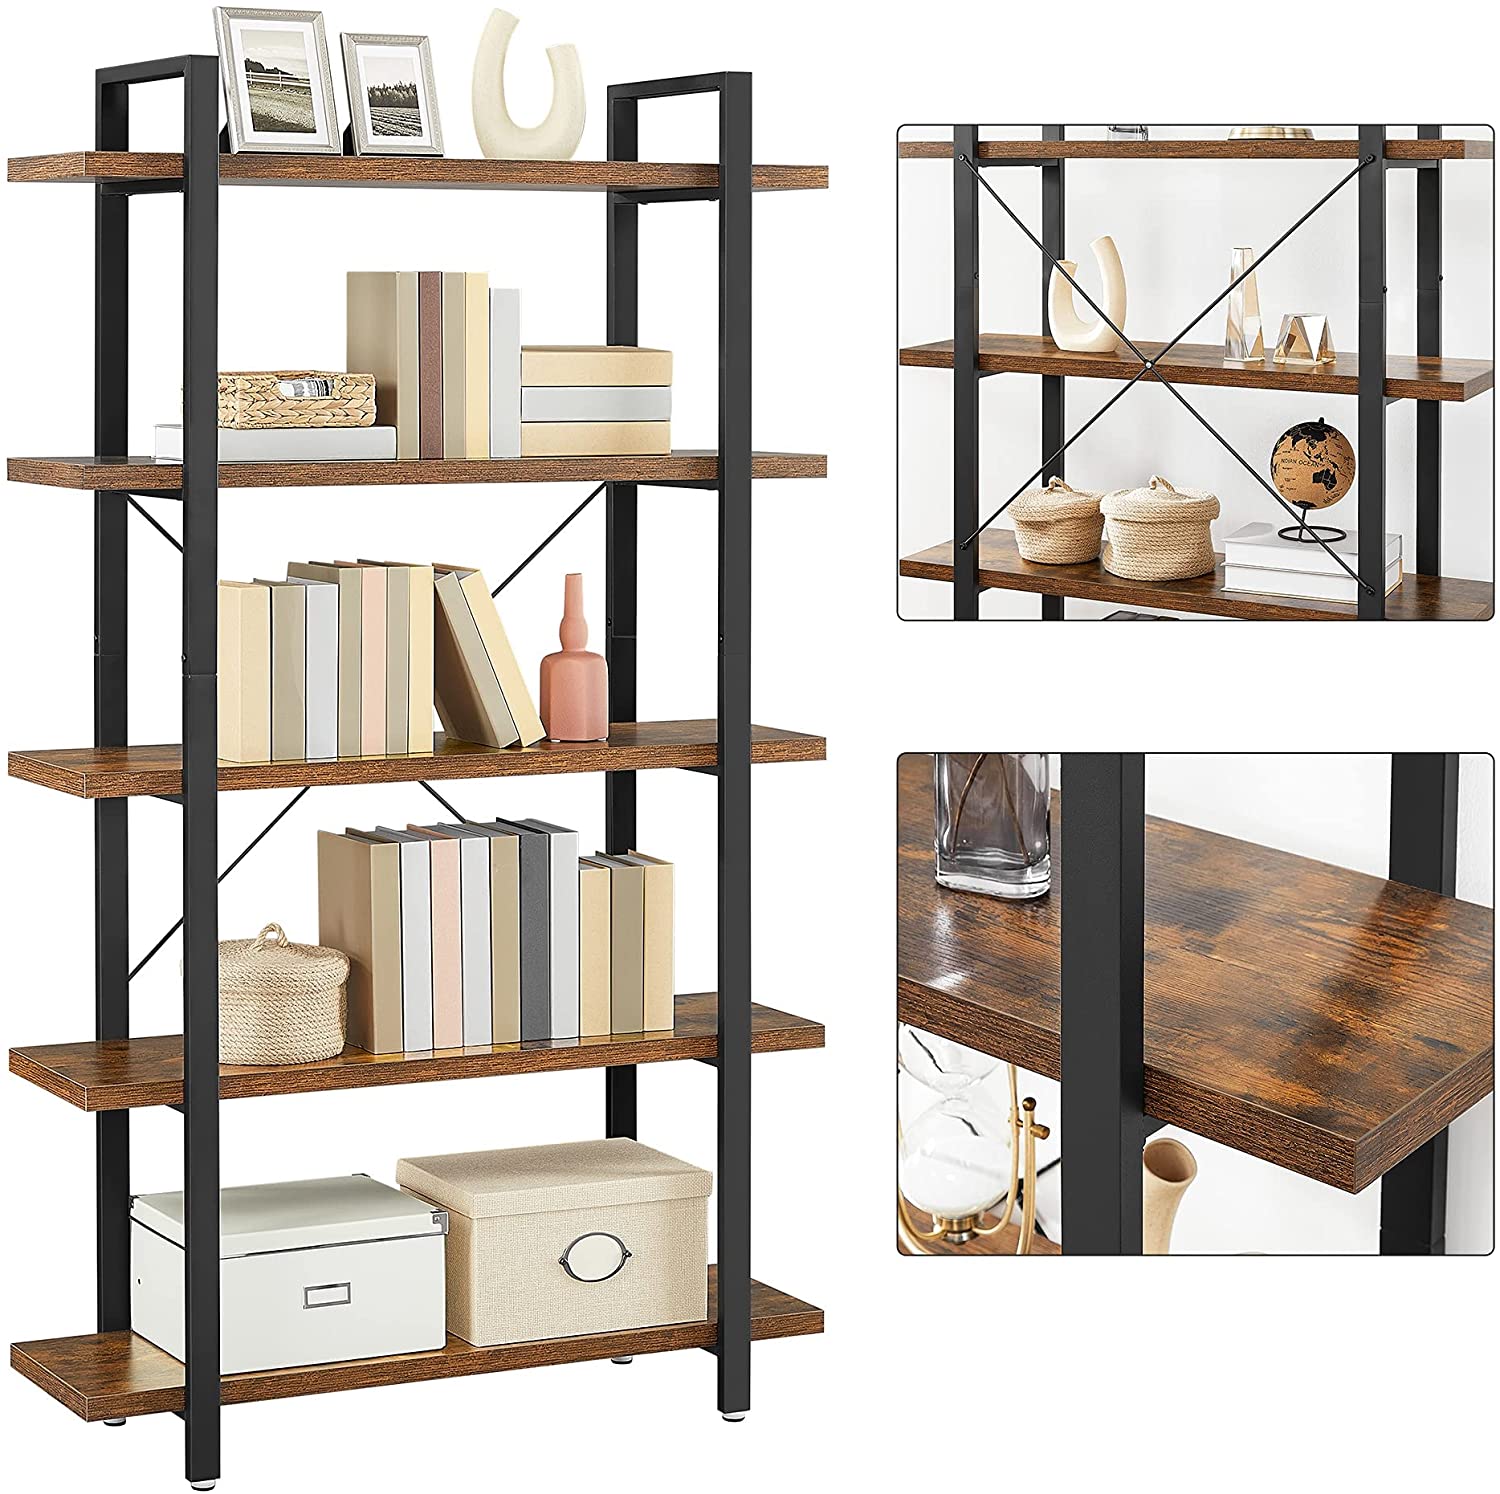 Bookshelf 5-Tier Industrial Stable Bookcase Rustic Brown and Black - image9